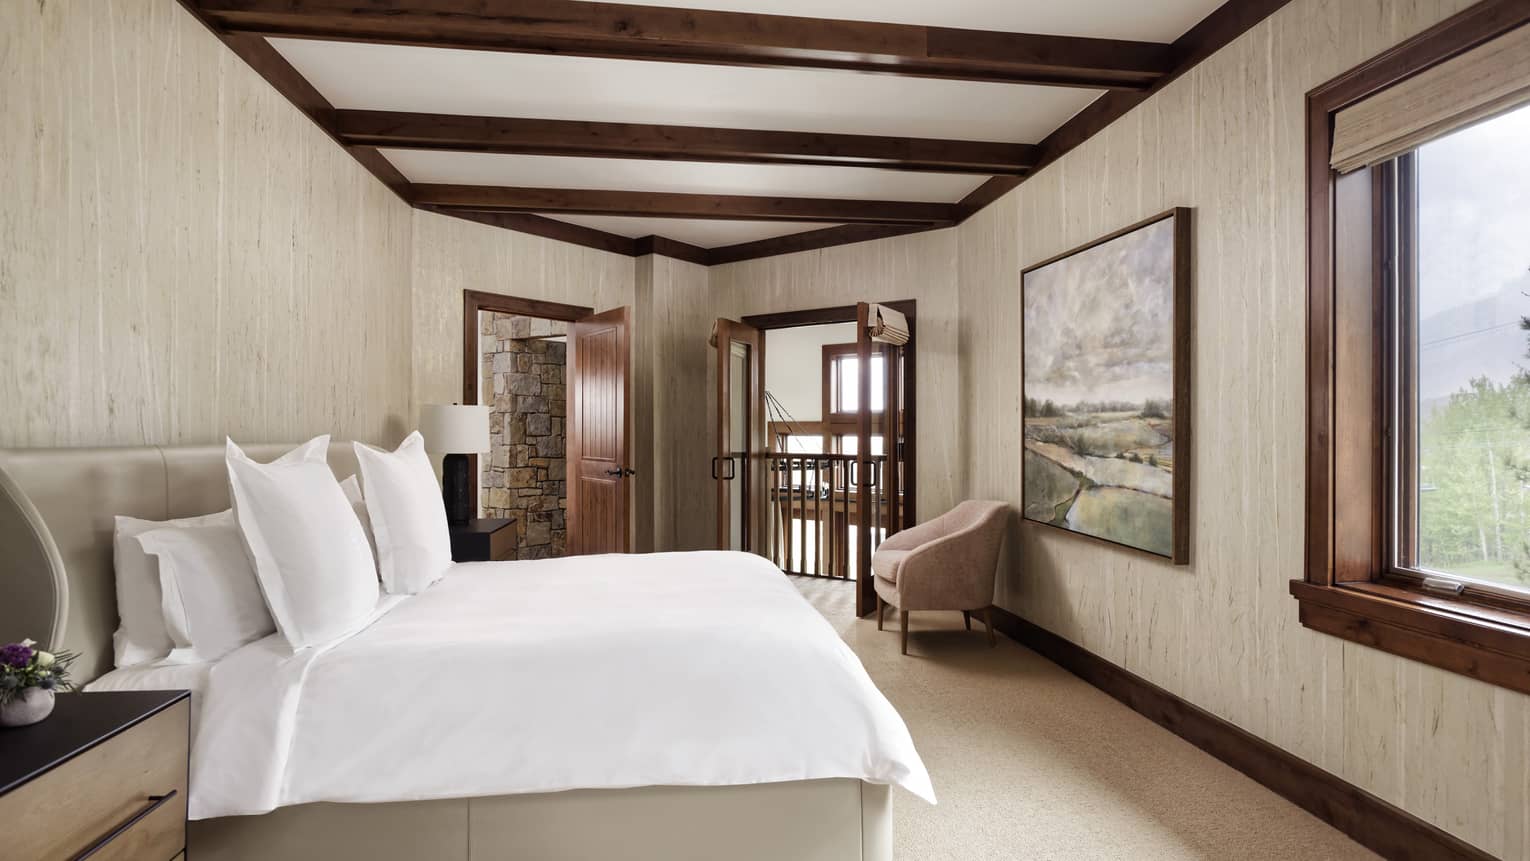 Bedroom with king bed, wooden beam ceiling, artwork and window